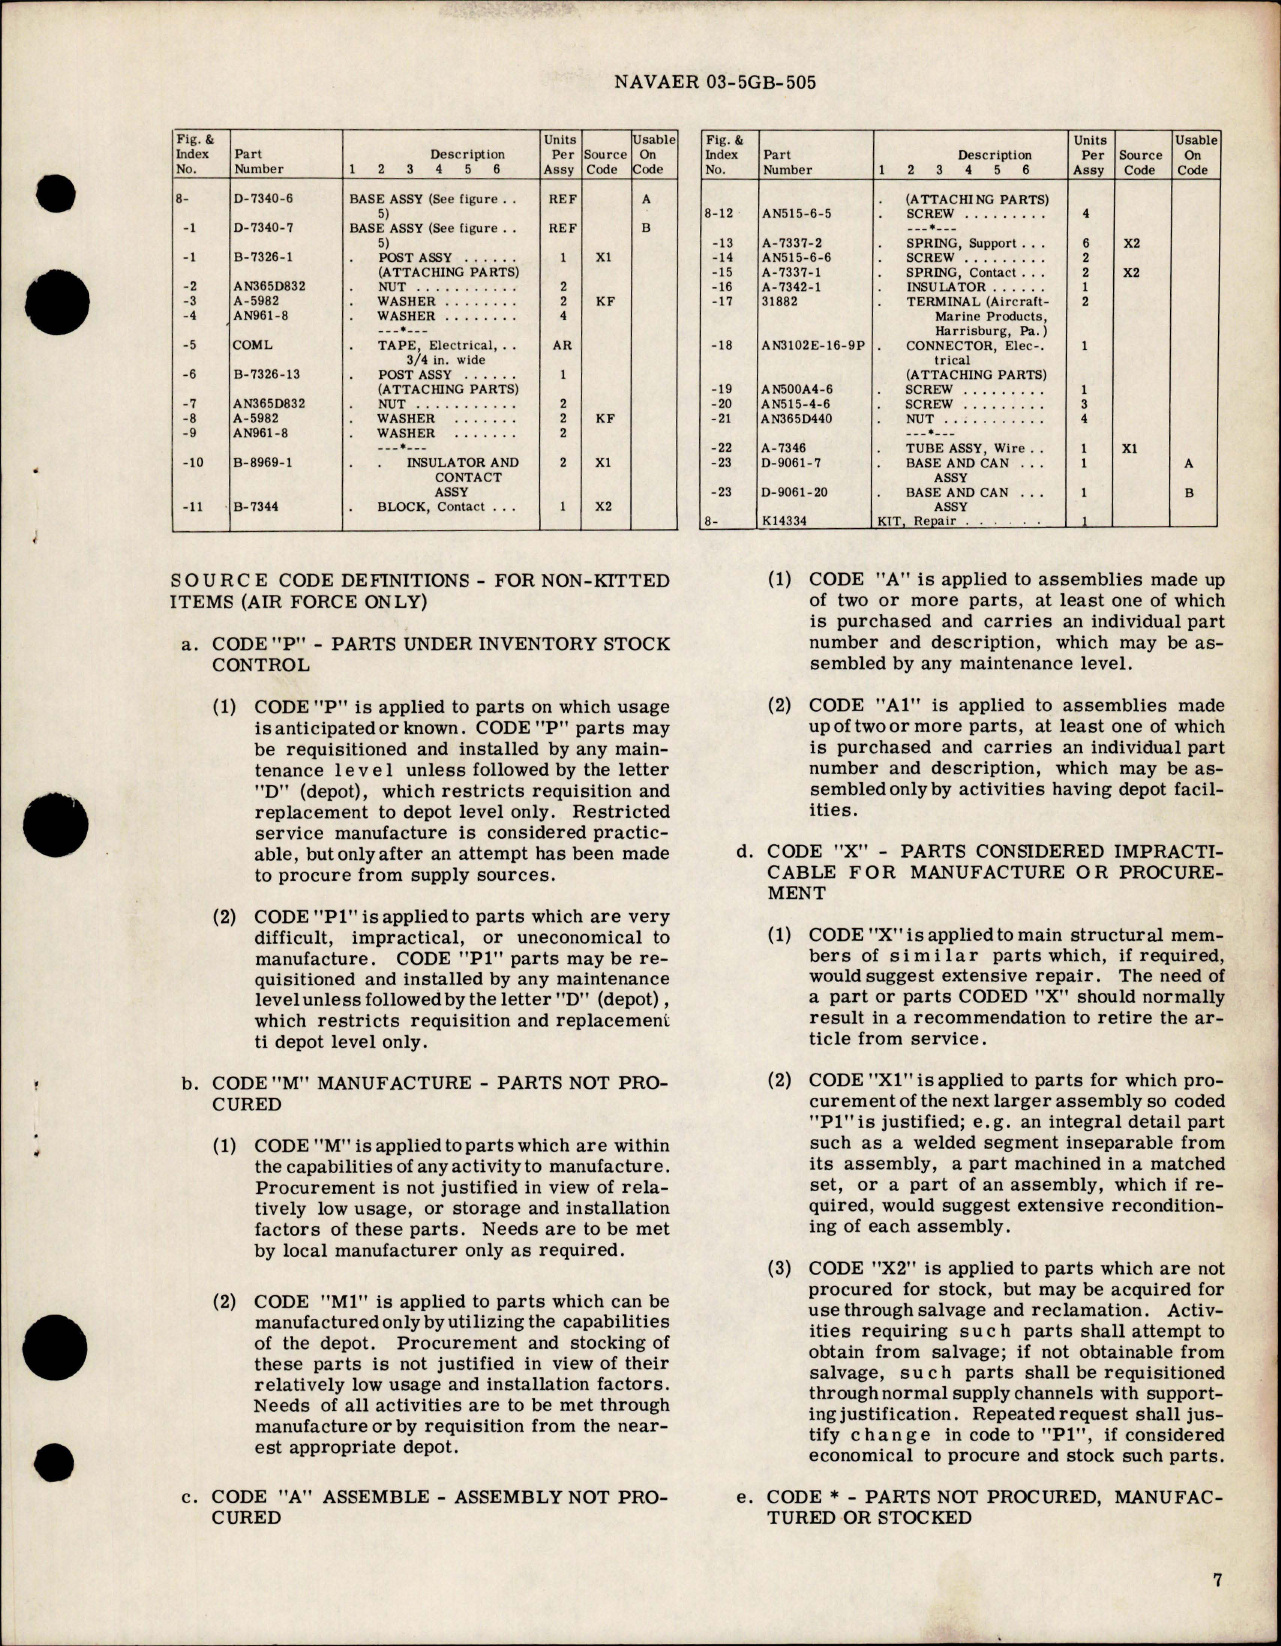 Sample page 5 from AirCorps Library document: Overhaul Instructions with Parts for Rotating Warning Navigational Light - Parts G-6965-11 and G-6965-31